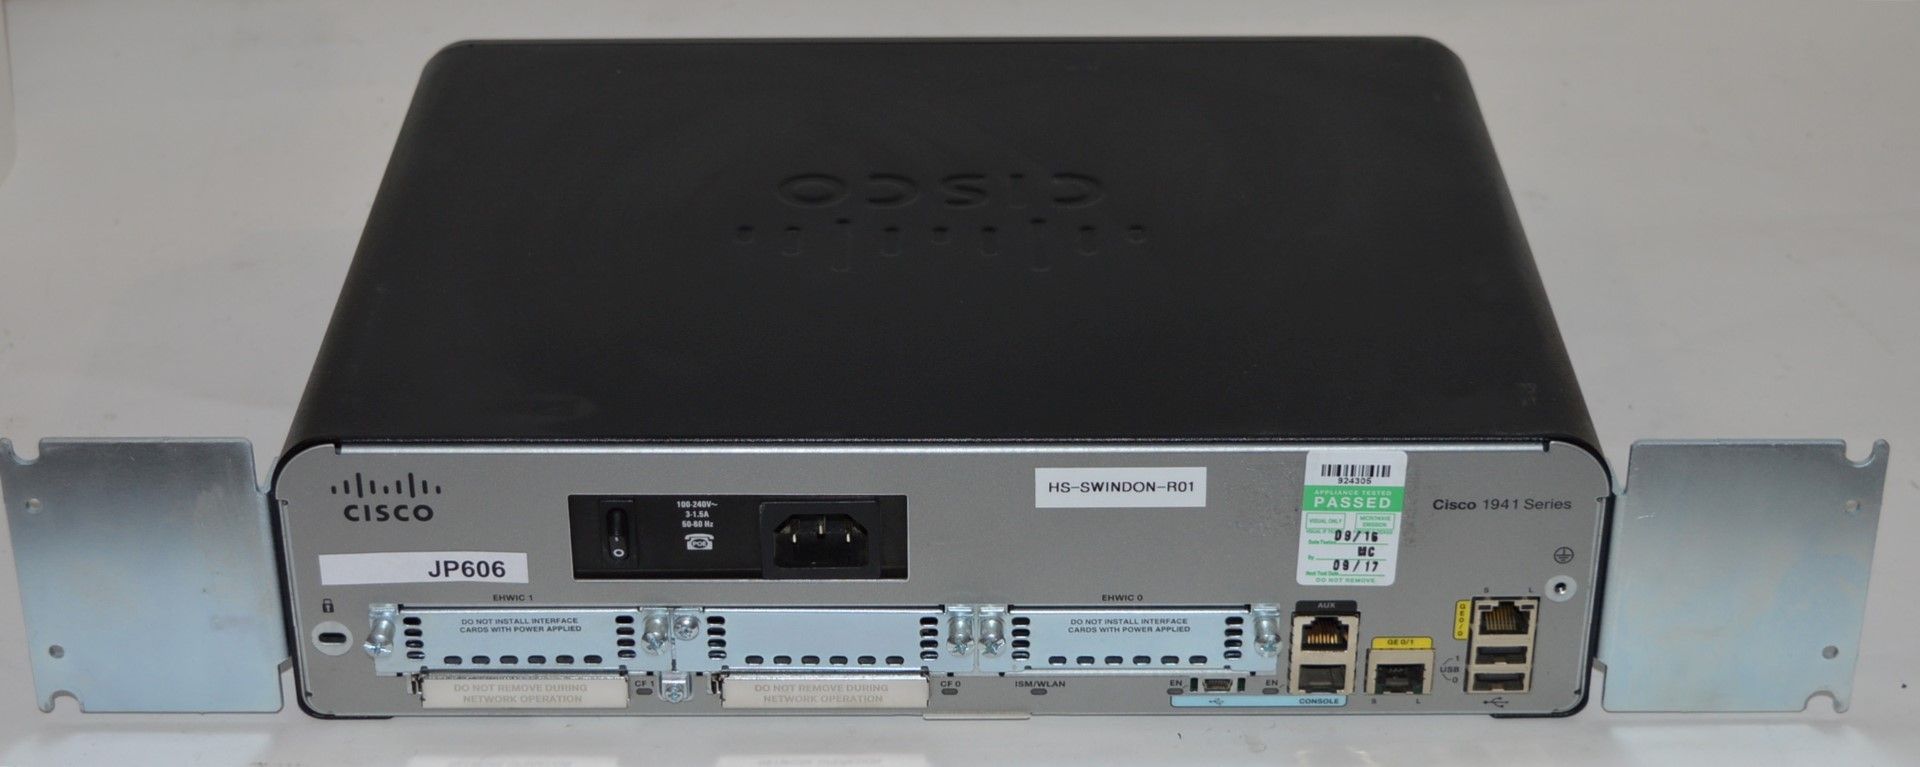 1 x Cisco 1941 Gigabit Port Router - Removed From Working Office Environment - CL400 Ref JP606 - - Image 2 of 5